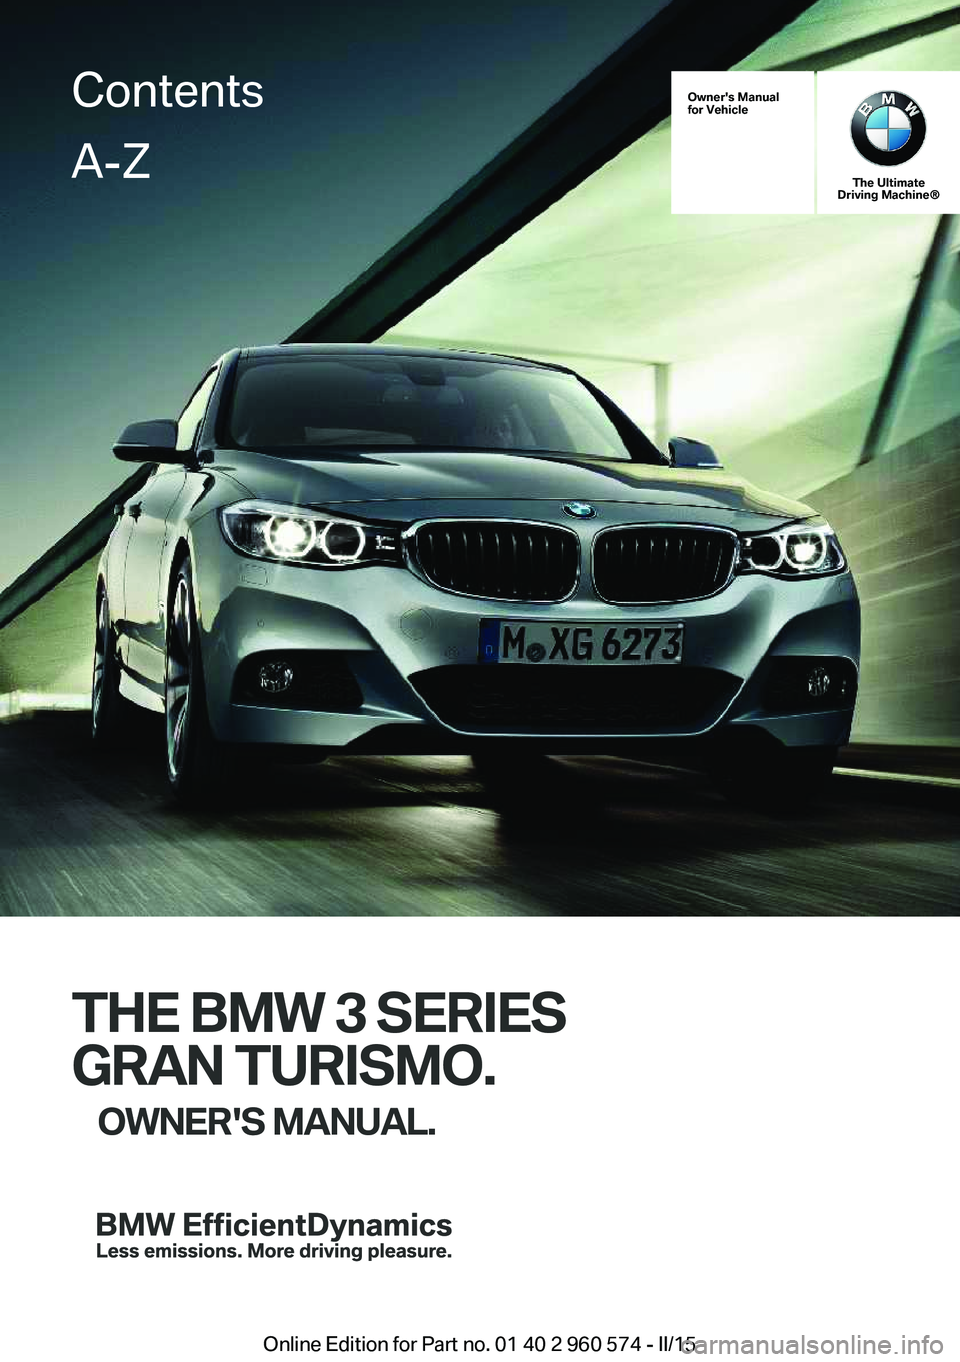 BMW 328I XDRIVE GRAN TURISMO 2015  Owners Manual Owner's Manual
for Vehicle
The Ultimate
Driving Machine®
THE BMW 3 SERIES
GRAN TURISMO. OWNER'S MANUAL.
ContentsA-Z
Online Edition for Part no. 01 40 2 960 574 - II/15   